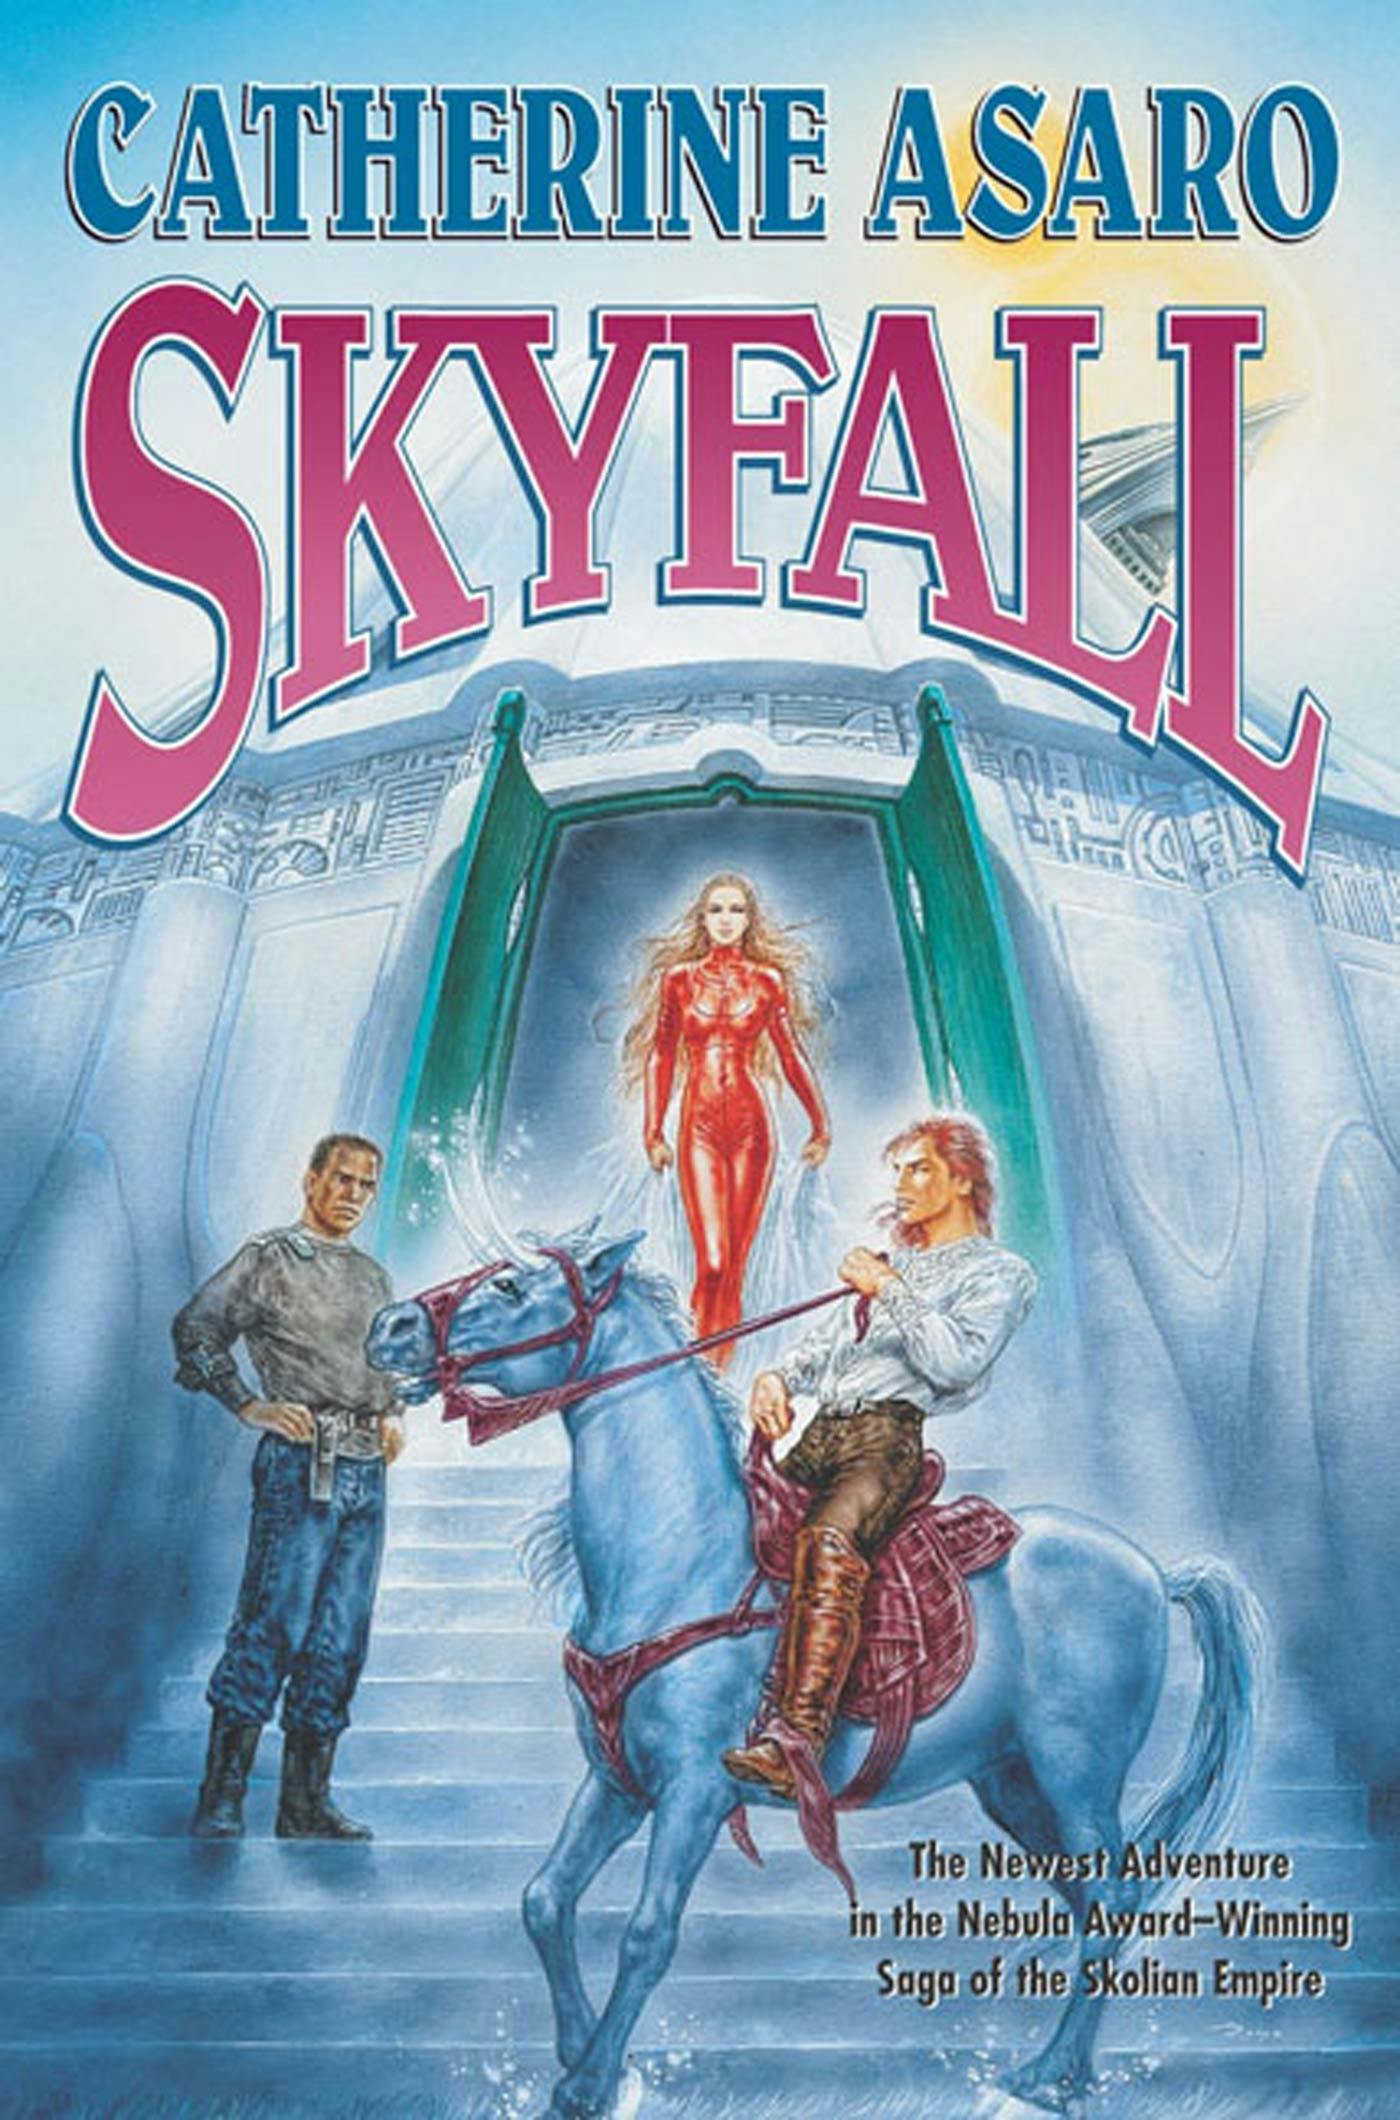 Cover for the book titled as: Skyfall